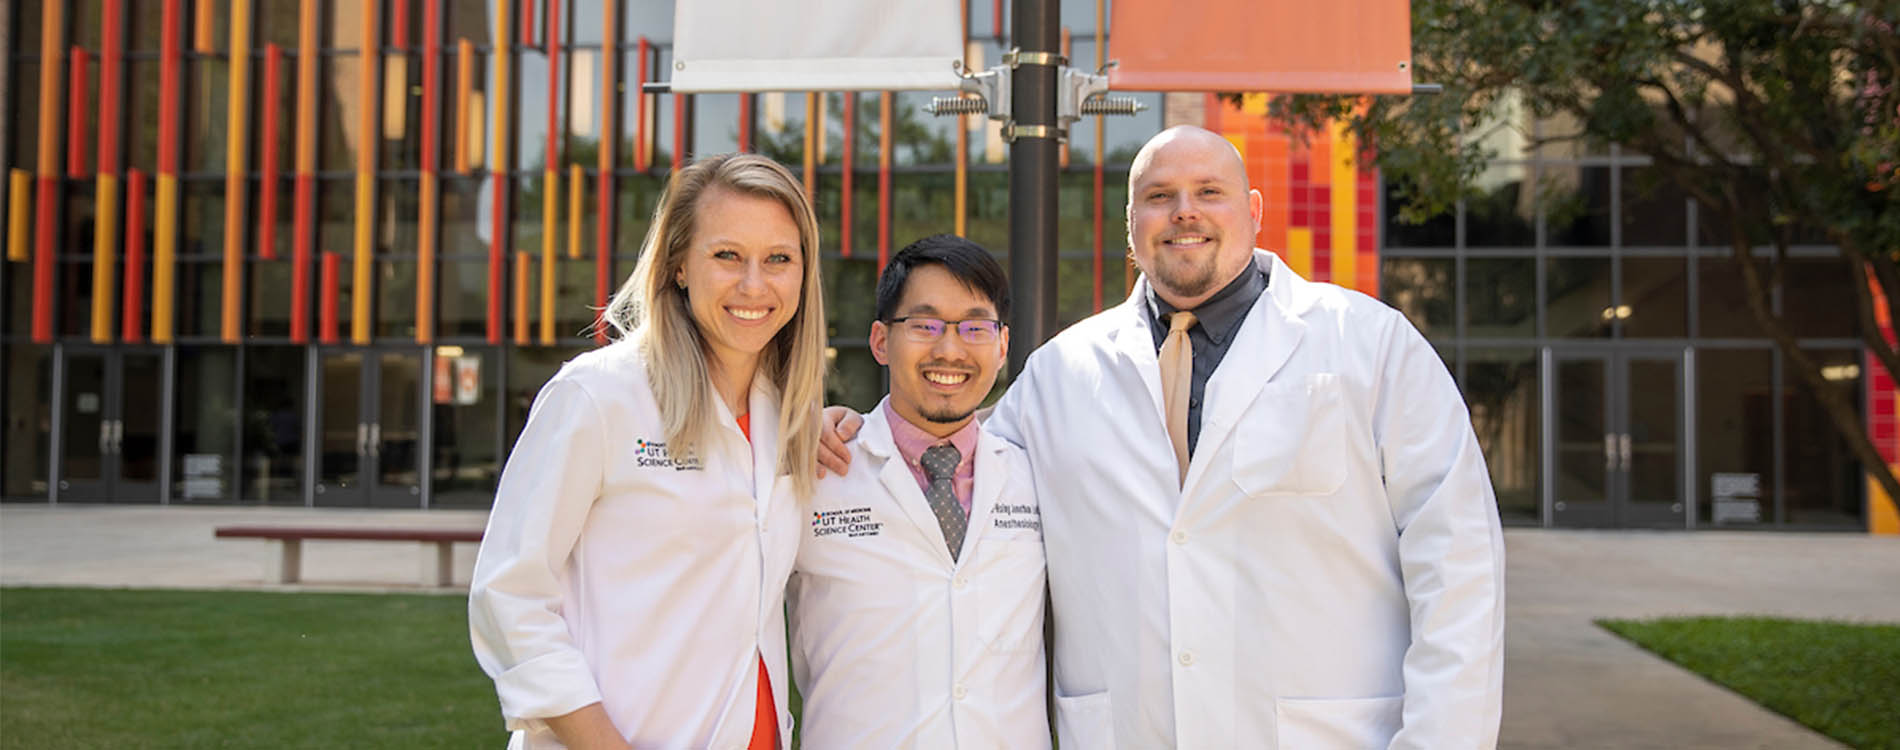 Three Anesthesiology residents in front of the ALT C Building